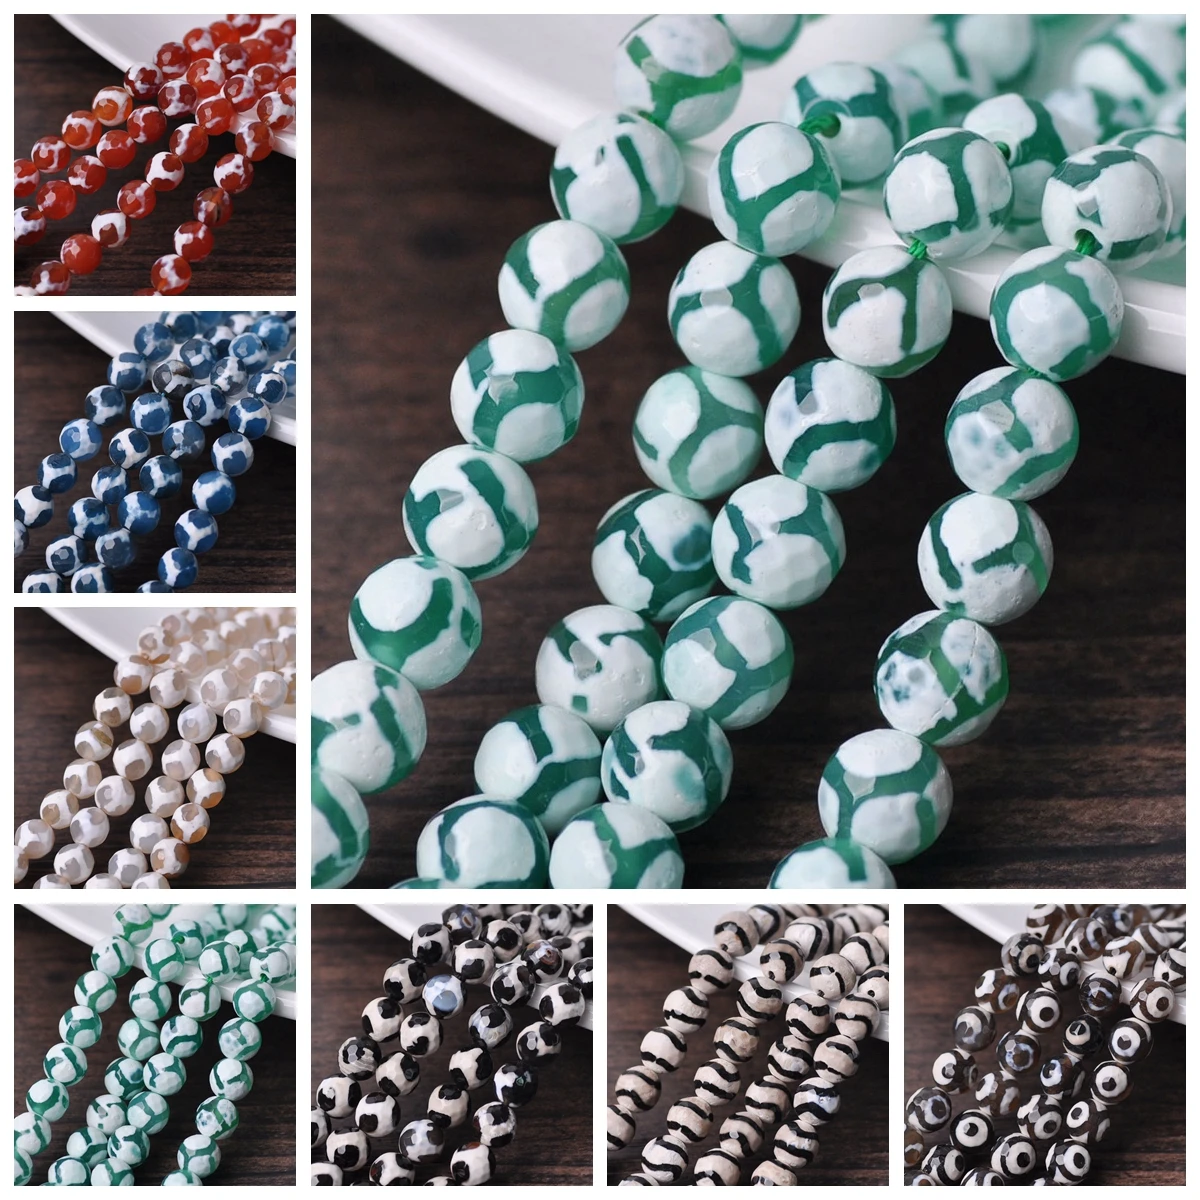 45pcs 8mm Round Faceted Combined Agate Stone Loose Beads Lot For DIY Jewelry Making Crafts Findings gem stone faceting machine manipulator grinding machine jewelry jade grinding faceted angle polisher index handle dops